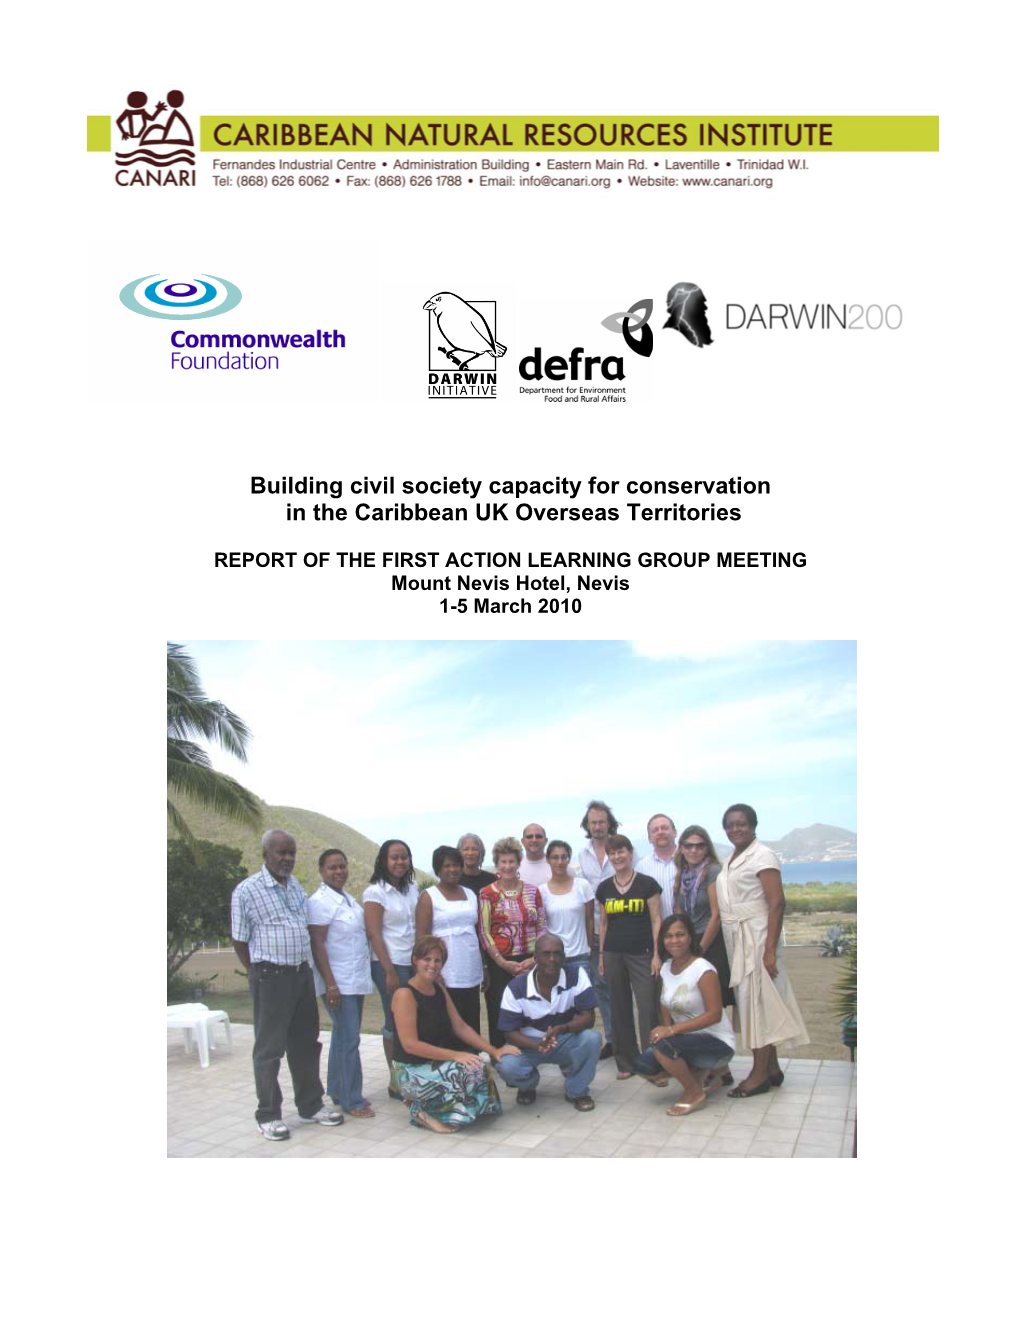 Building Civil Society Capacity for Conservation in the Caribbean UK Overseas Territories